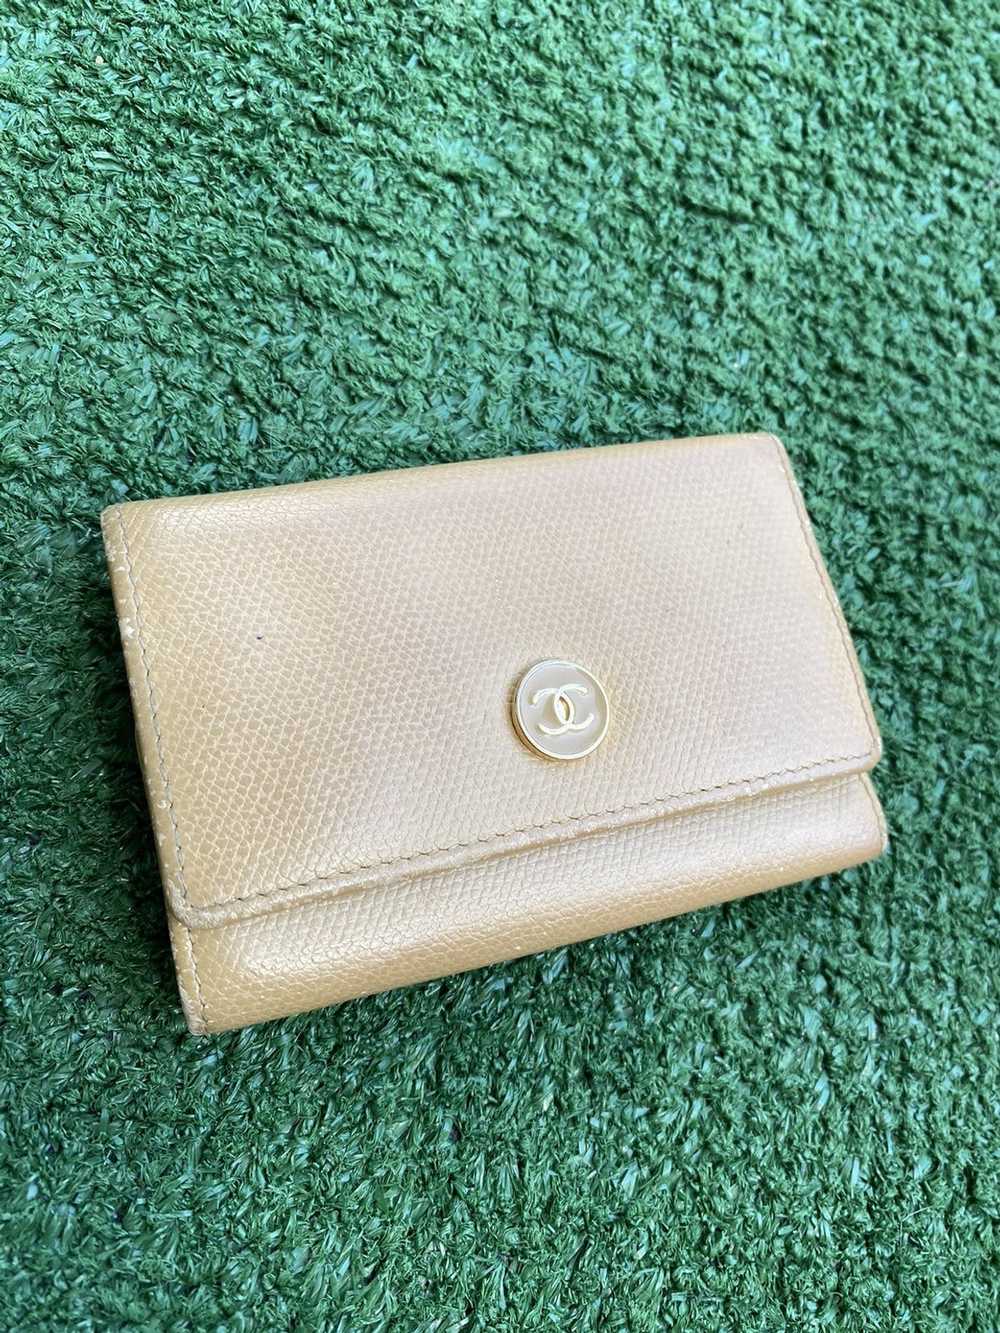 CHANEL Leather Wallets for Women for Sale 